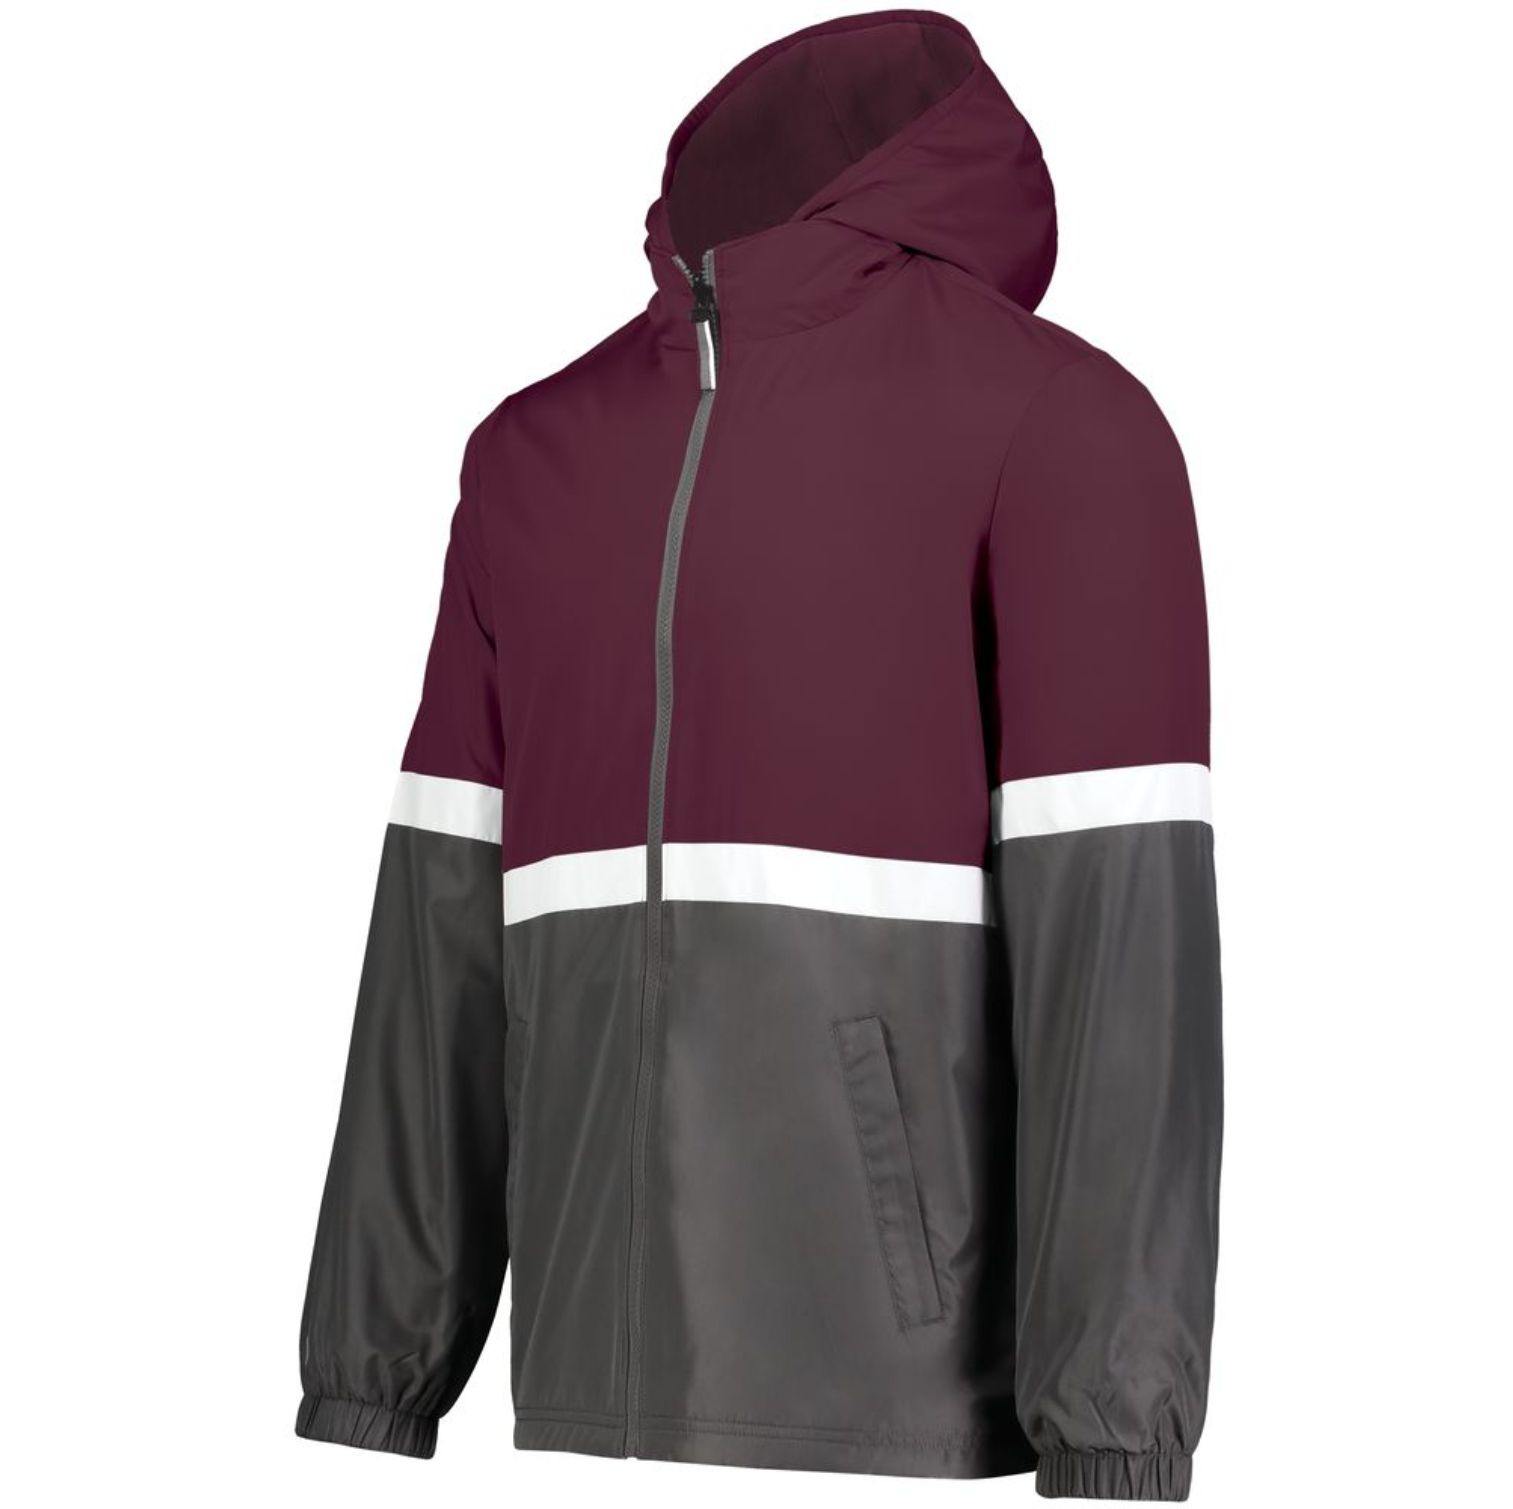 Holloway Turnabout Reversible Jacket #229587 Maroon / Carbon